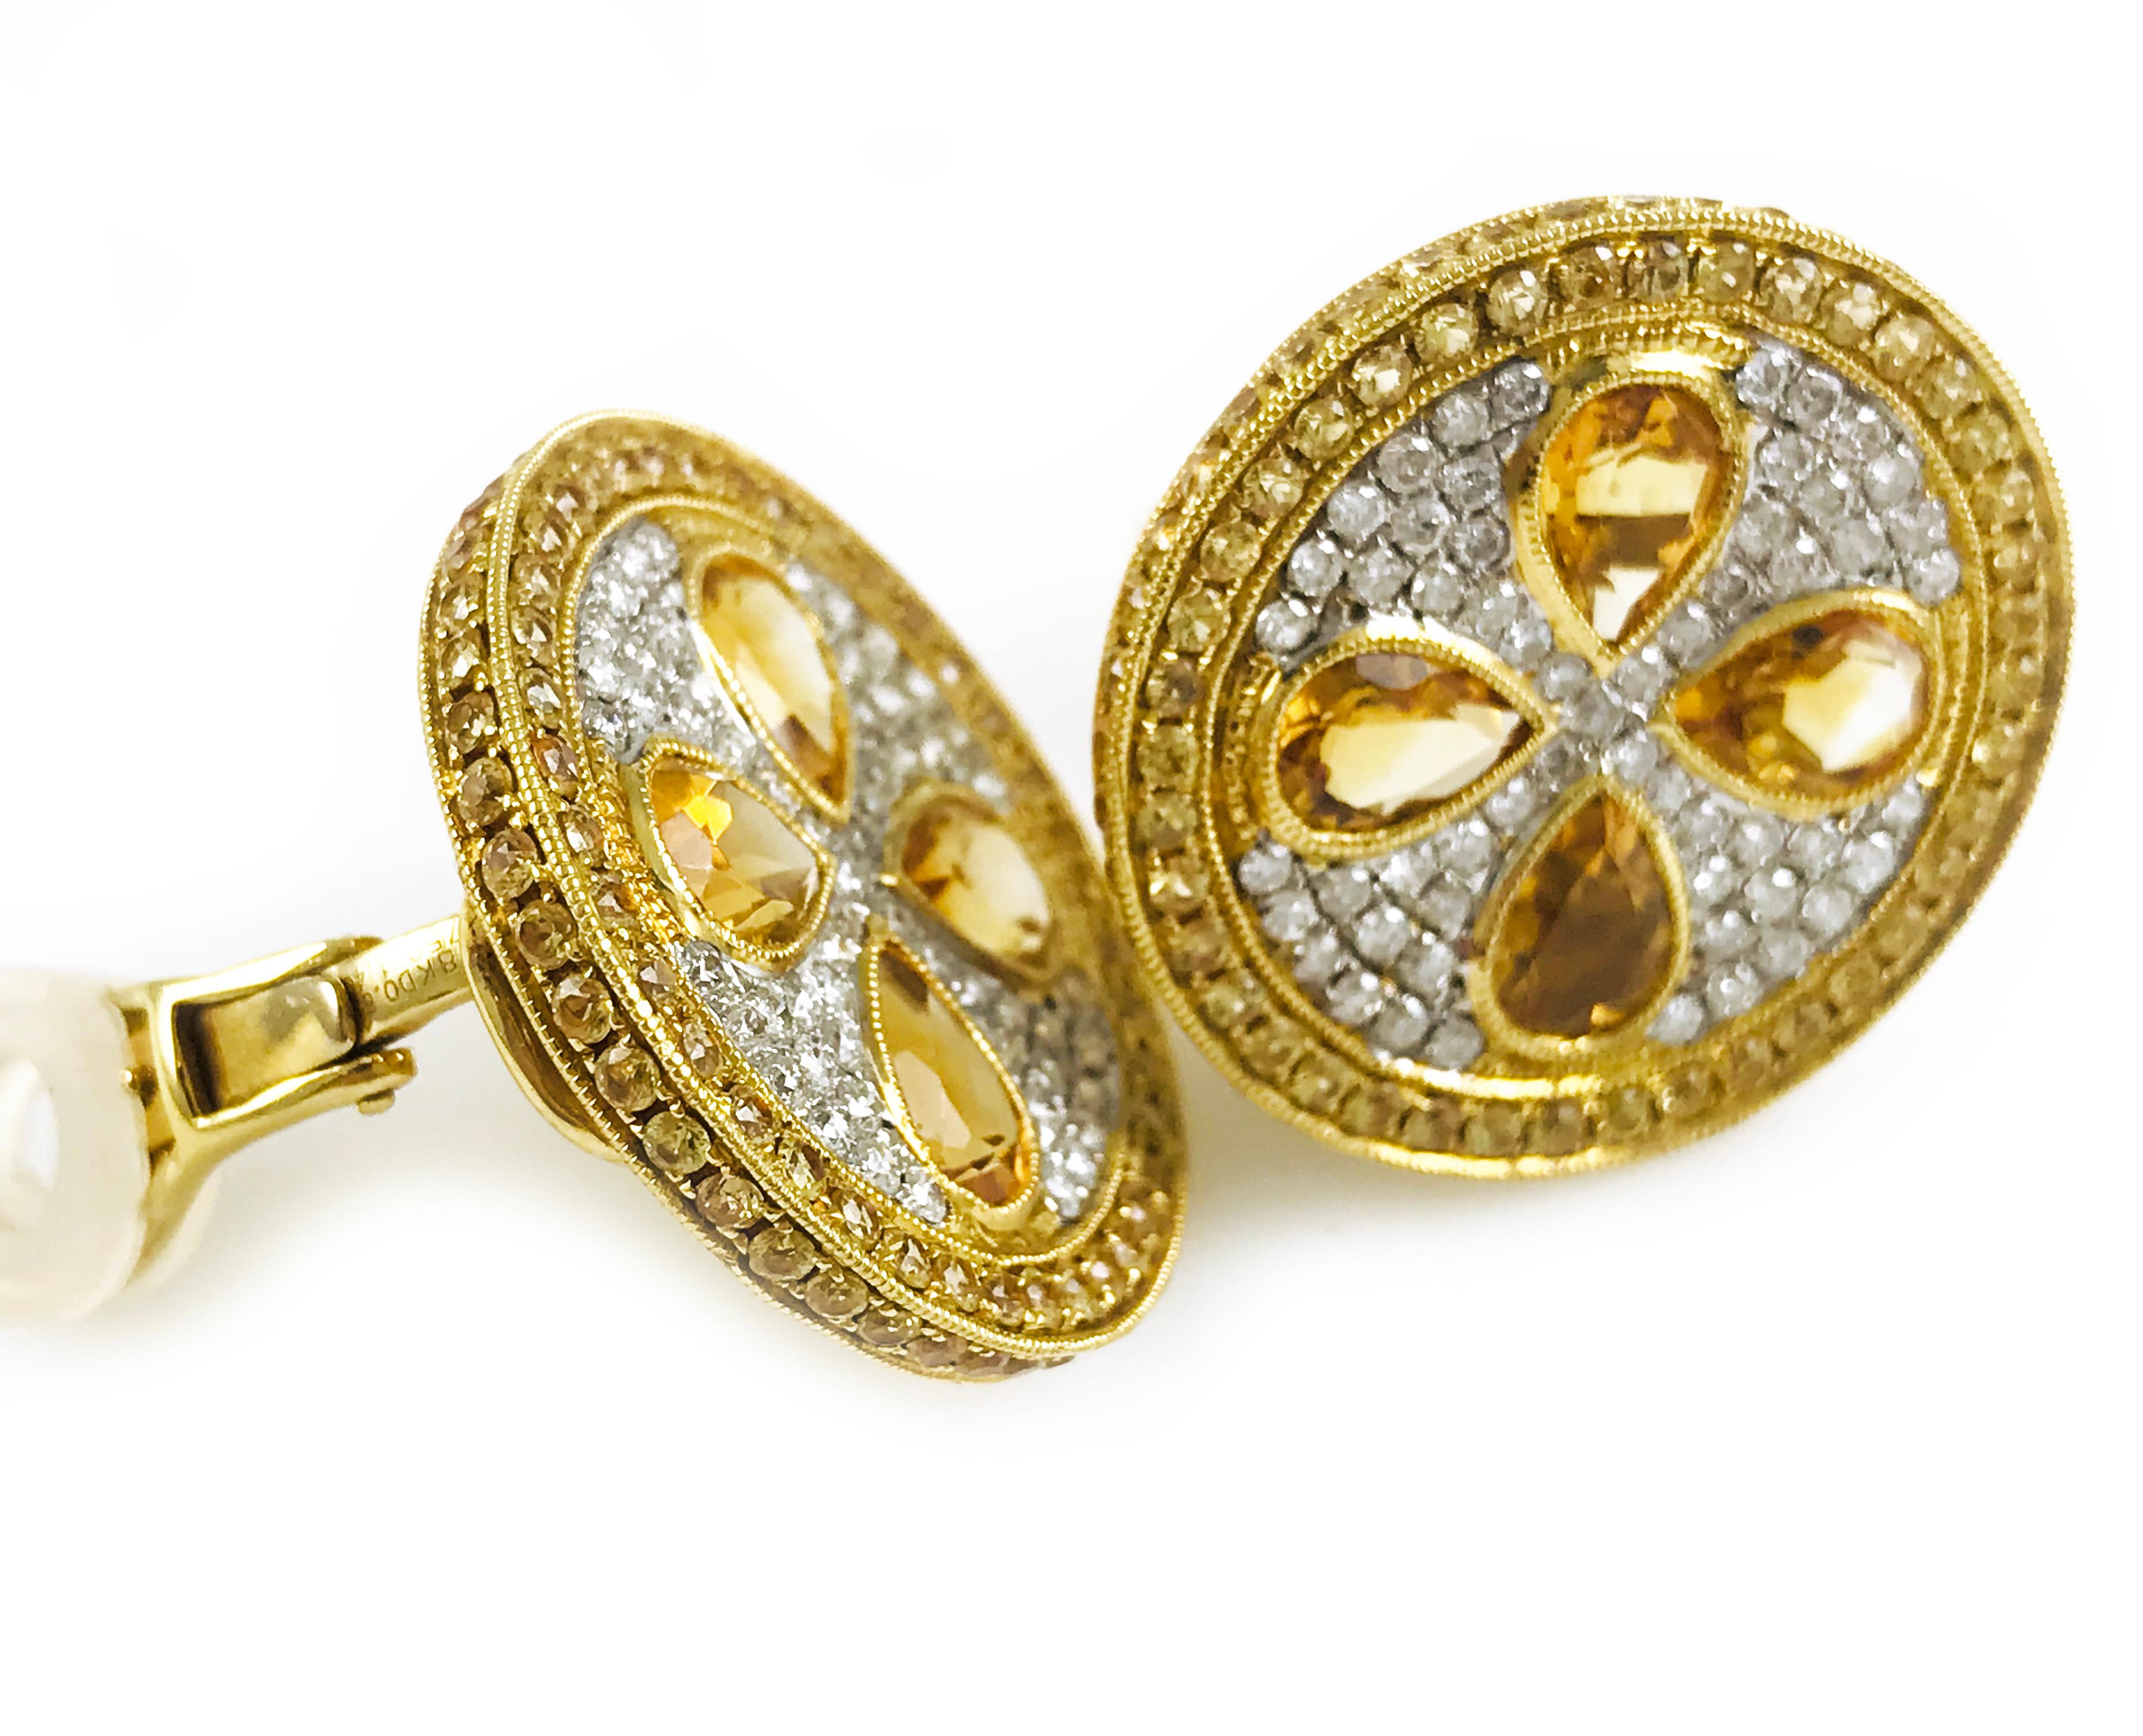 18 Karat Gold Pavé Yellow pear-shaped Citrine, yellow natural Sapphire and Diamond Earrings. Four stunning pear-shape bezel-set yellow Citrines adorn these earrings with round-cut bead-set yellow natural sapphires on the outer circle and around the